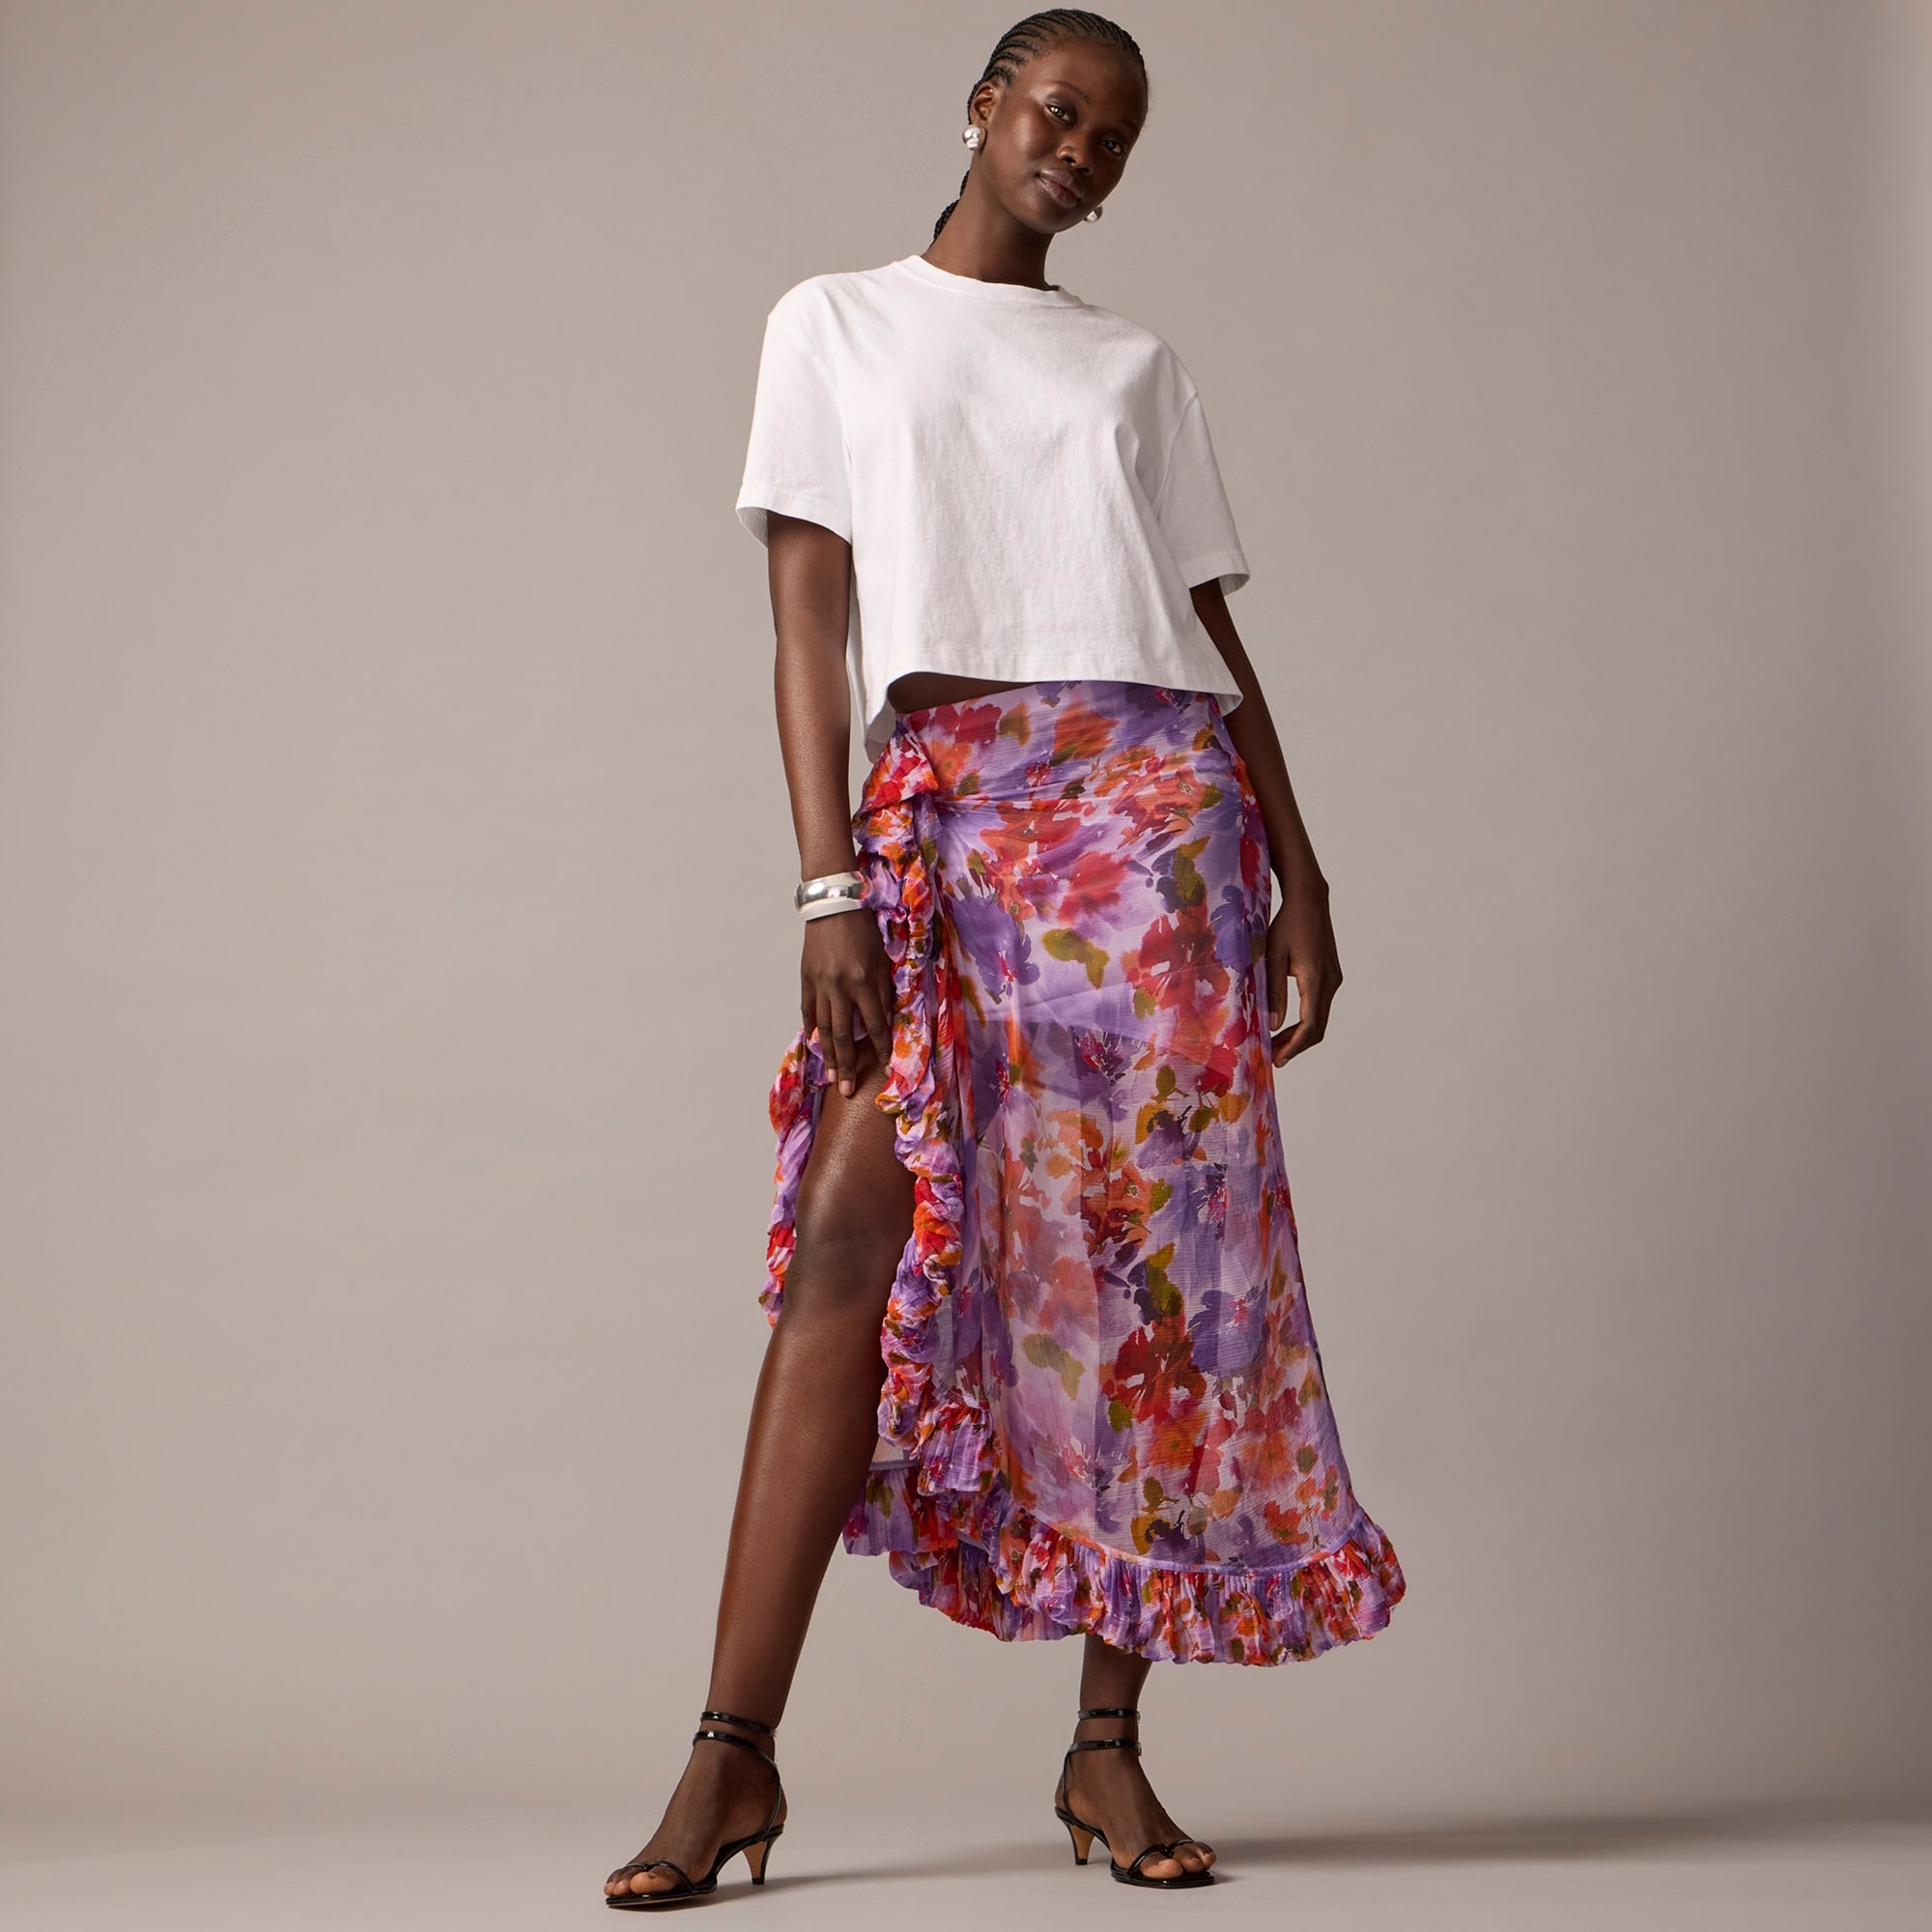  Collection chiffon ruffle skirt in floral